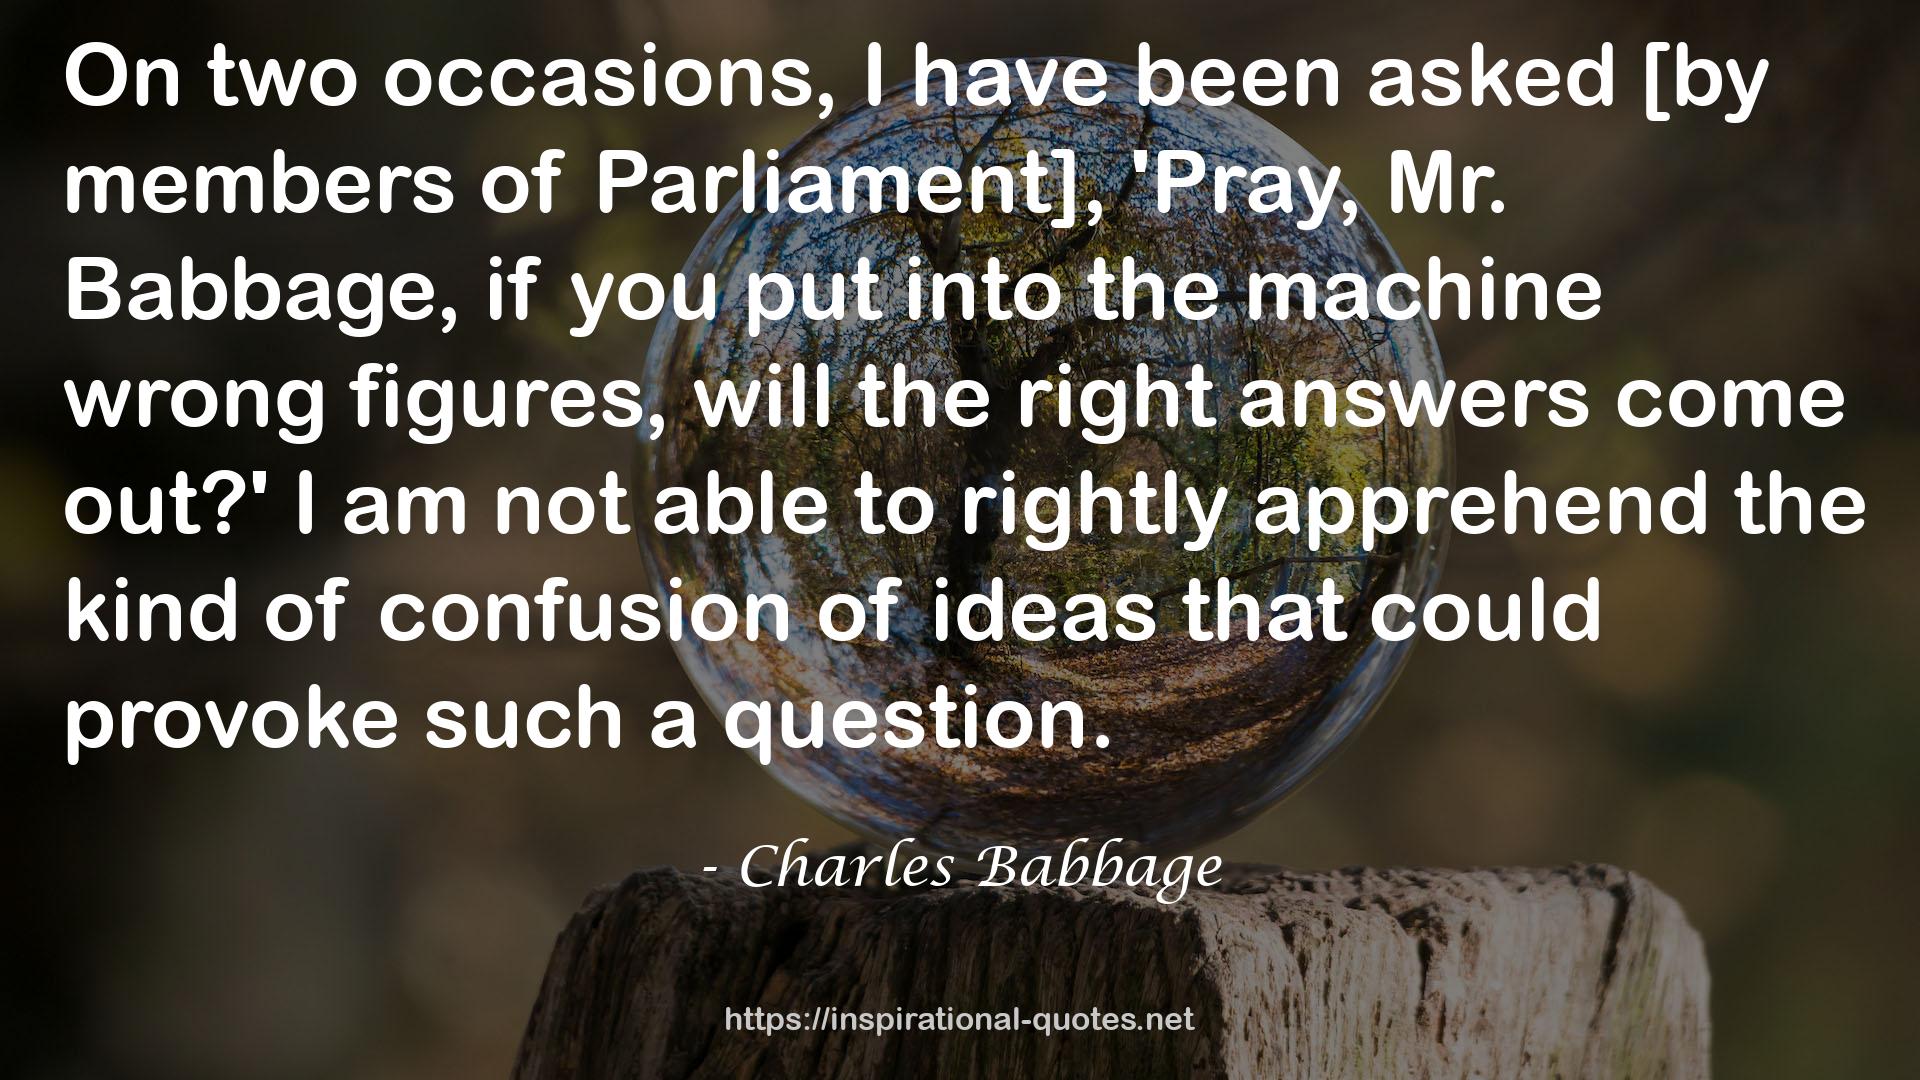 Charles Babbage QUOTES